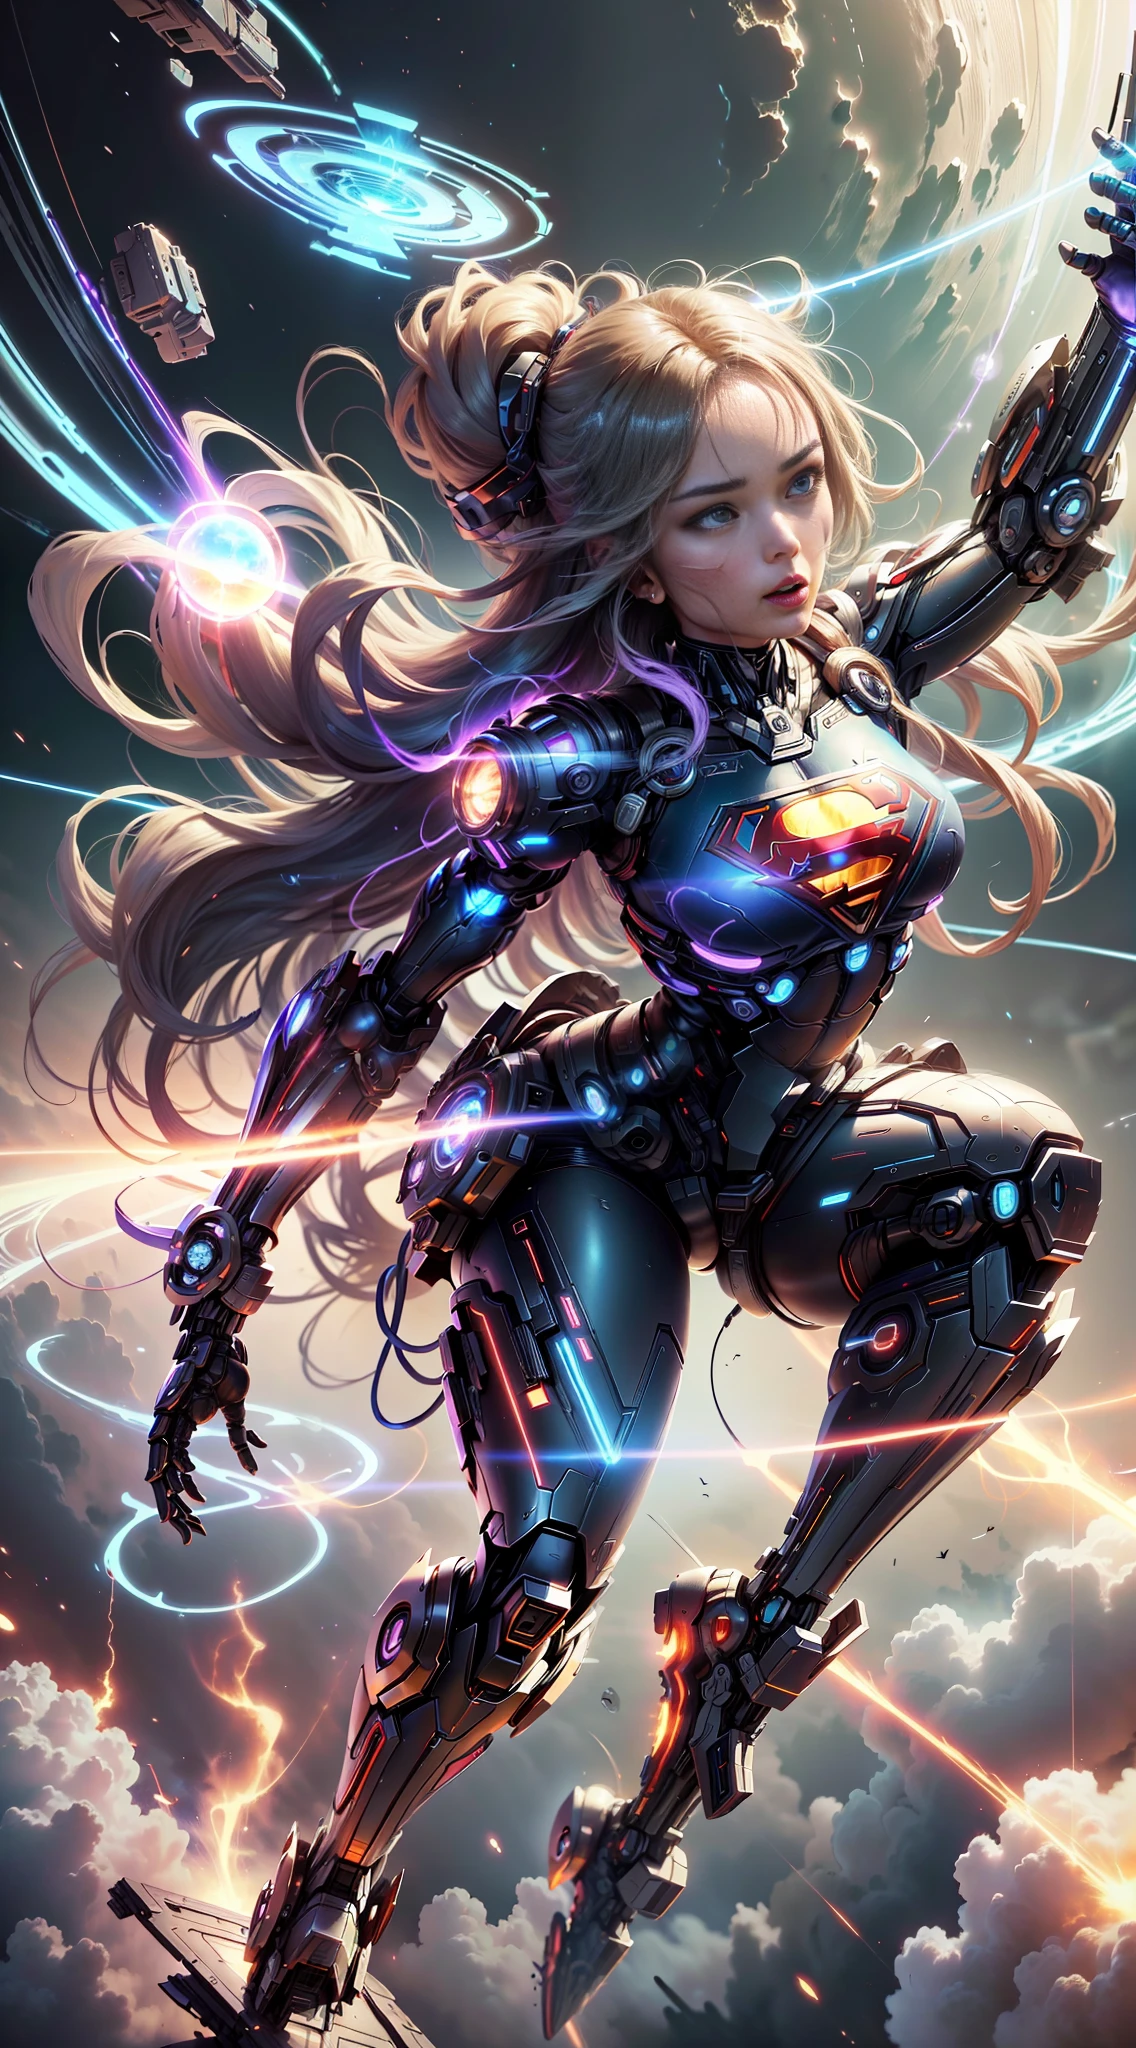 ((Best quality)), ((Supergirl's masterpiece)), (highly detailed:1.3), 3D, beautiful, (cyberpunk:1.2), in space, nebulous, holding_weapon, laser, (1Female Mecha:1.3), sexy body, facing the audience, bright blue eyes, full body, blonde, (flying, descending, dynamic, motion blur: 1.4), (huge wings of wicks: 1.6), looking up, glowing_eyes, mecha, panorama, background is earth,  nebula, space, particles, Reality, HDR (High Dynamic Range), Ray Tracing, NVIDIA RTX, Super Resolution, Unreal 5, Subsurface Scattering, PBR Textures, Post-Processing, Anisotropic Filtering, Depth of Field, Maximum Clarity and Clarity, Multilayer Textures, Albedo and Specular Maps, Surface Shading, Accurate Simulation of Light-Material Interaction, Perfect Proportions, Octane Render, Two-Tone Lighting, Large Aperture, Low ISO,  white balance, rule of thirds, 8K RAW, efficient sub-pixel, sub-pixel volume product, (best quality), (Japanese: 0.5), (Korean: 0.8), (Liu Yi Fei: 1.5) long hair, (big chest: 1.2) wearing superman's S on the chest. --auto --s2